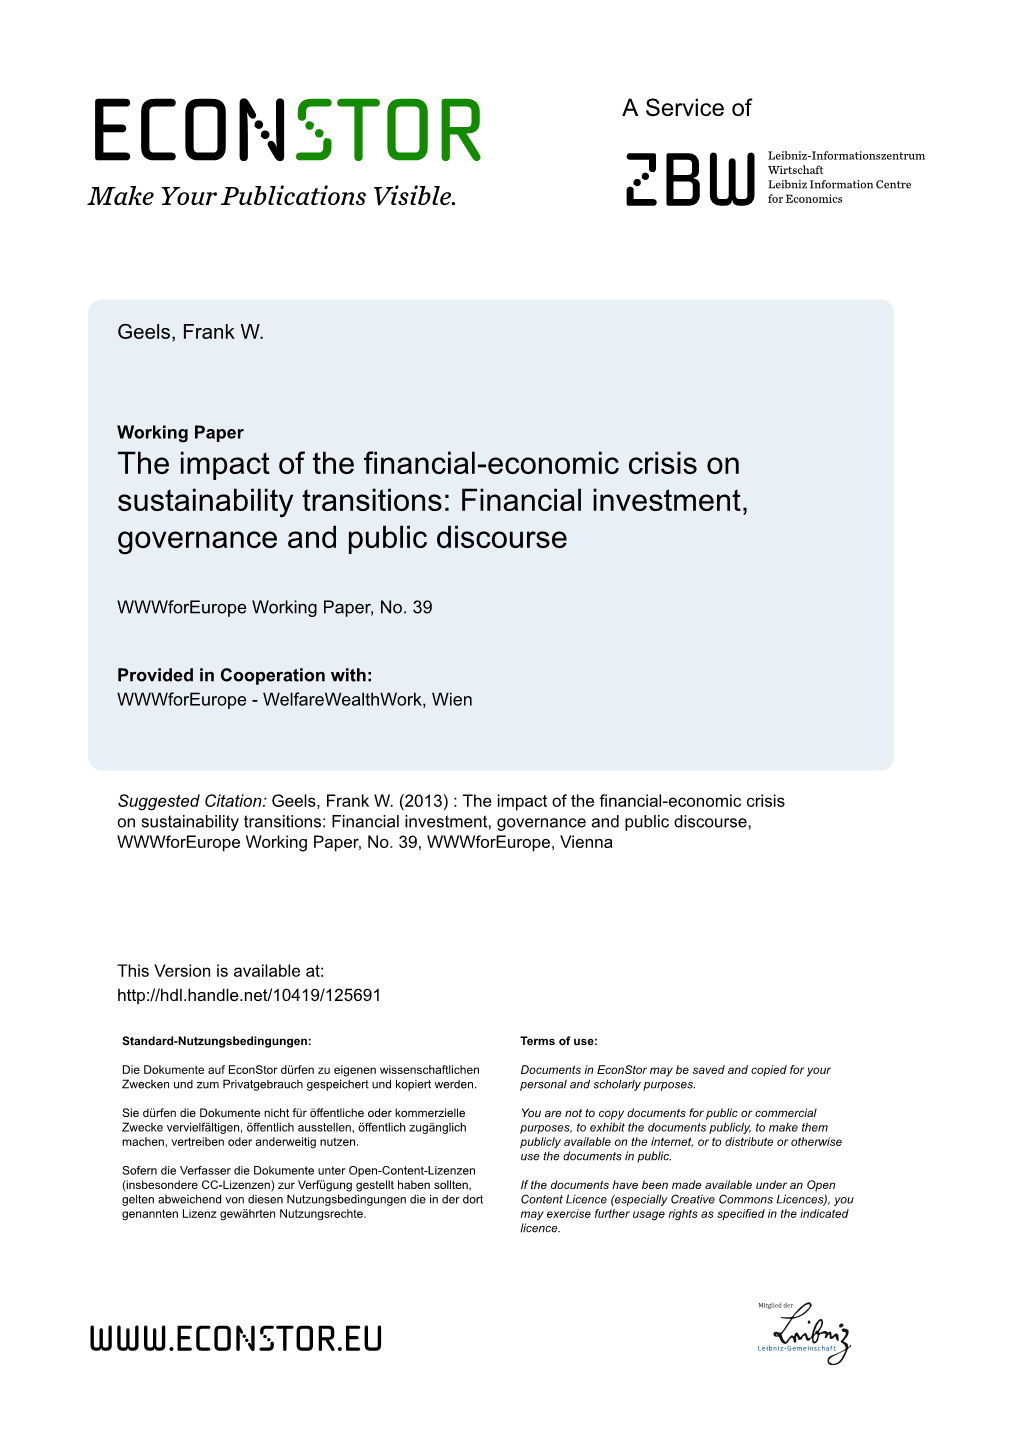 The Impact of the Financial-Economic Crisis on Sustainability Transitions: Financial Investment, Governance and Public Discourse